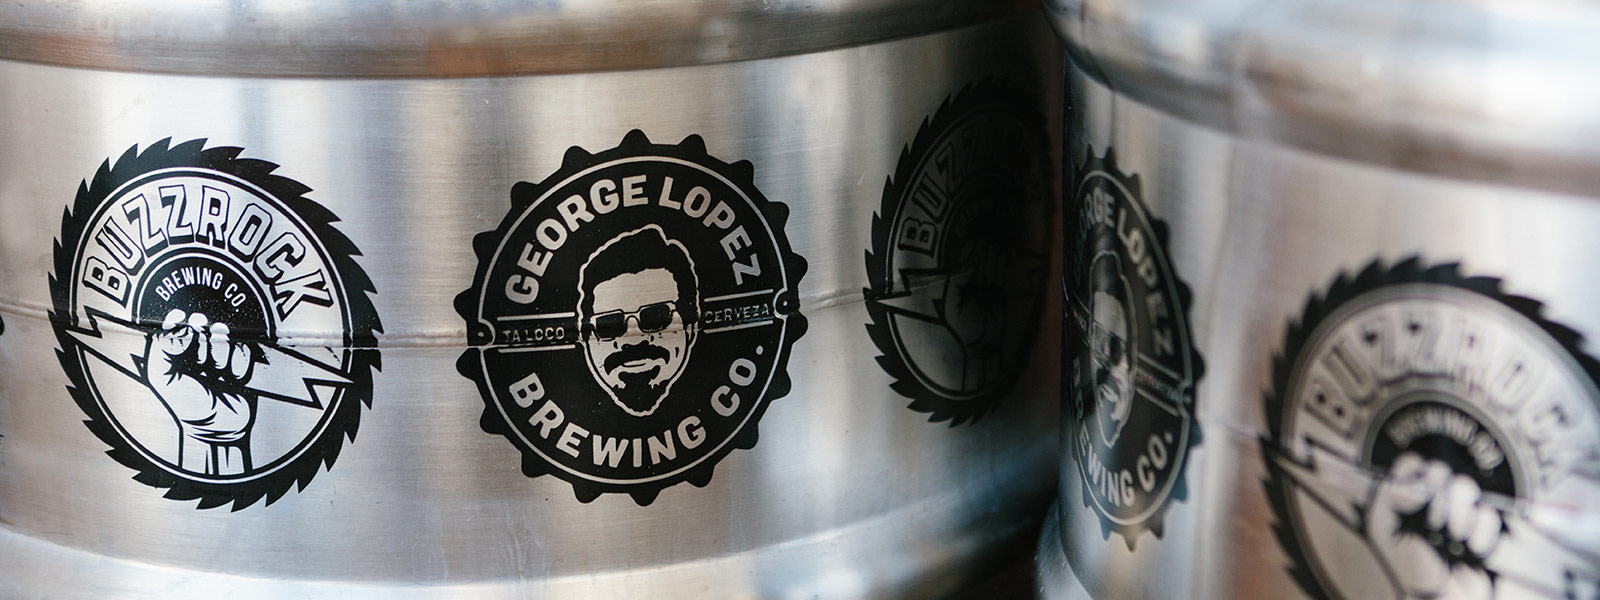 Buzzrock Brewing Co. and George Lopez Brewing Co. kegs at The Brews Hall @ Del Amo